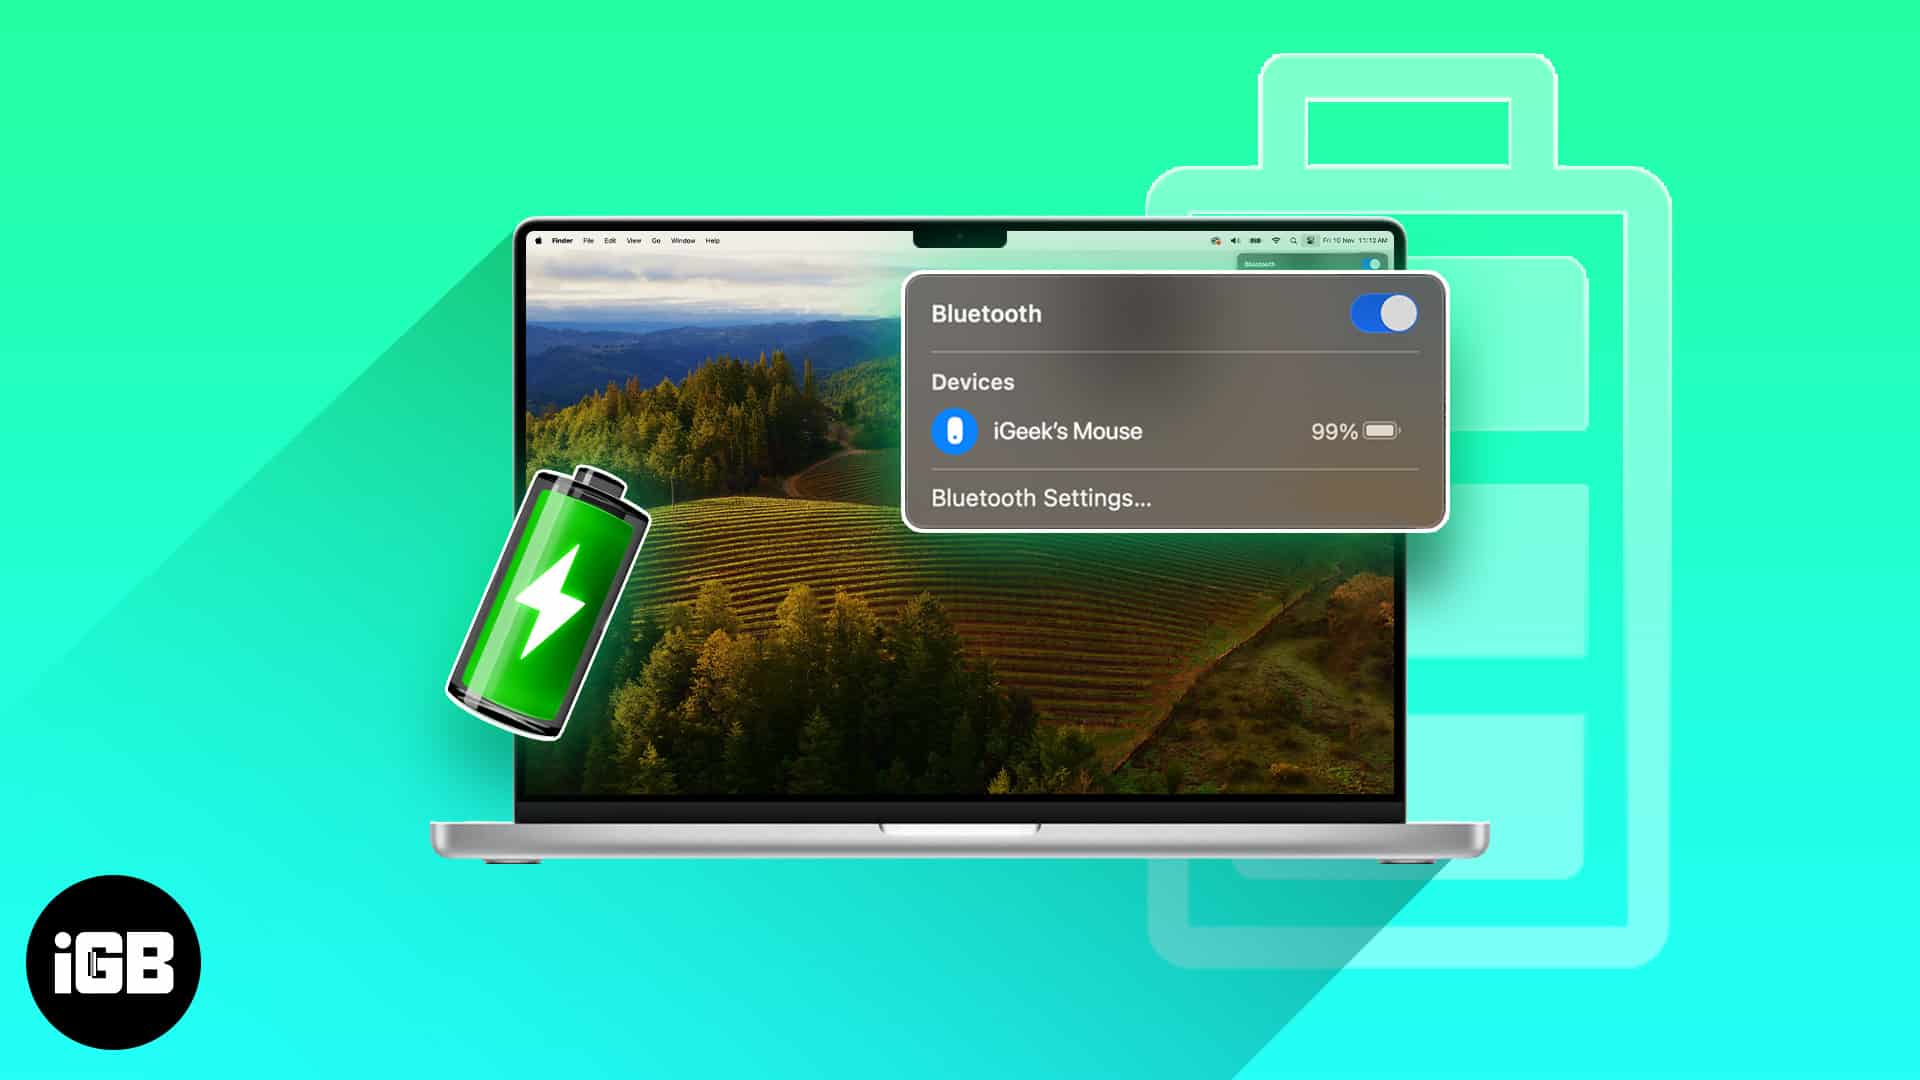 How to check battery level of bluetooth devices connected to mac